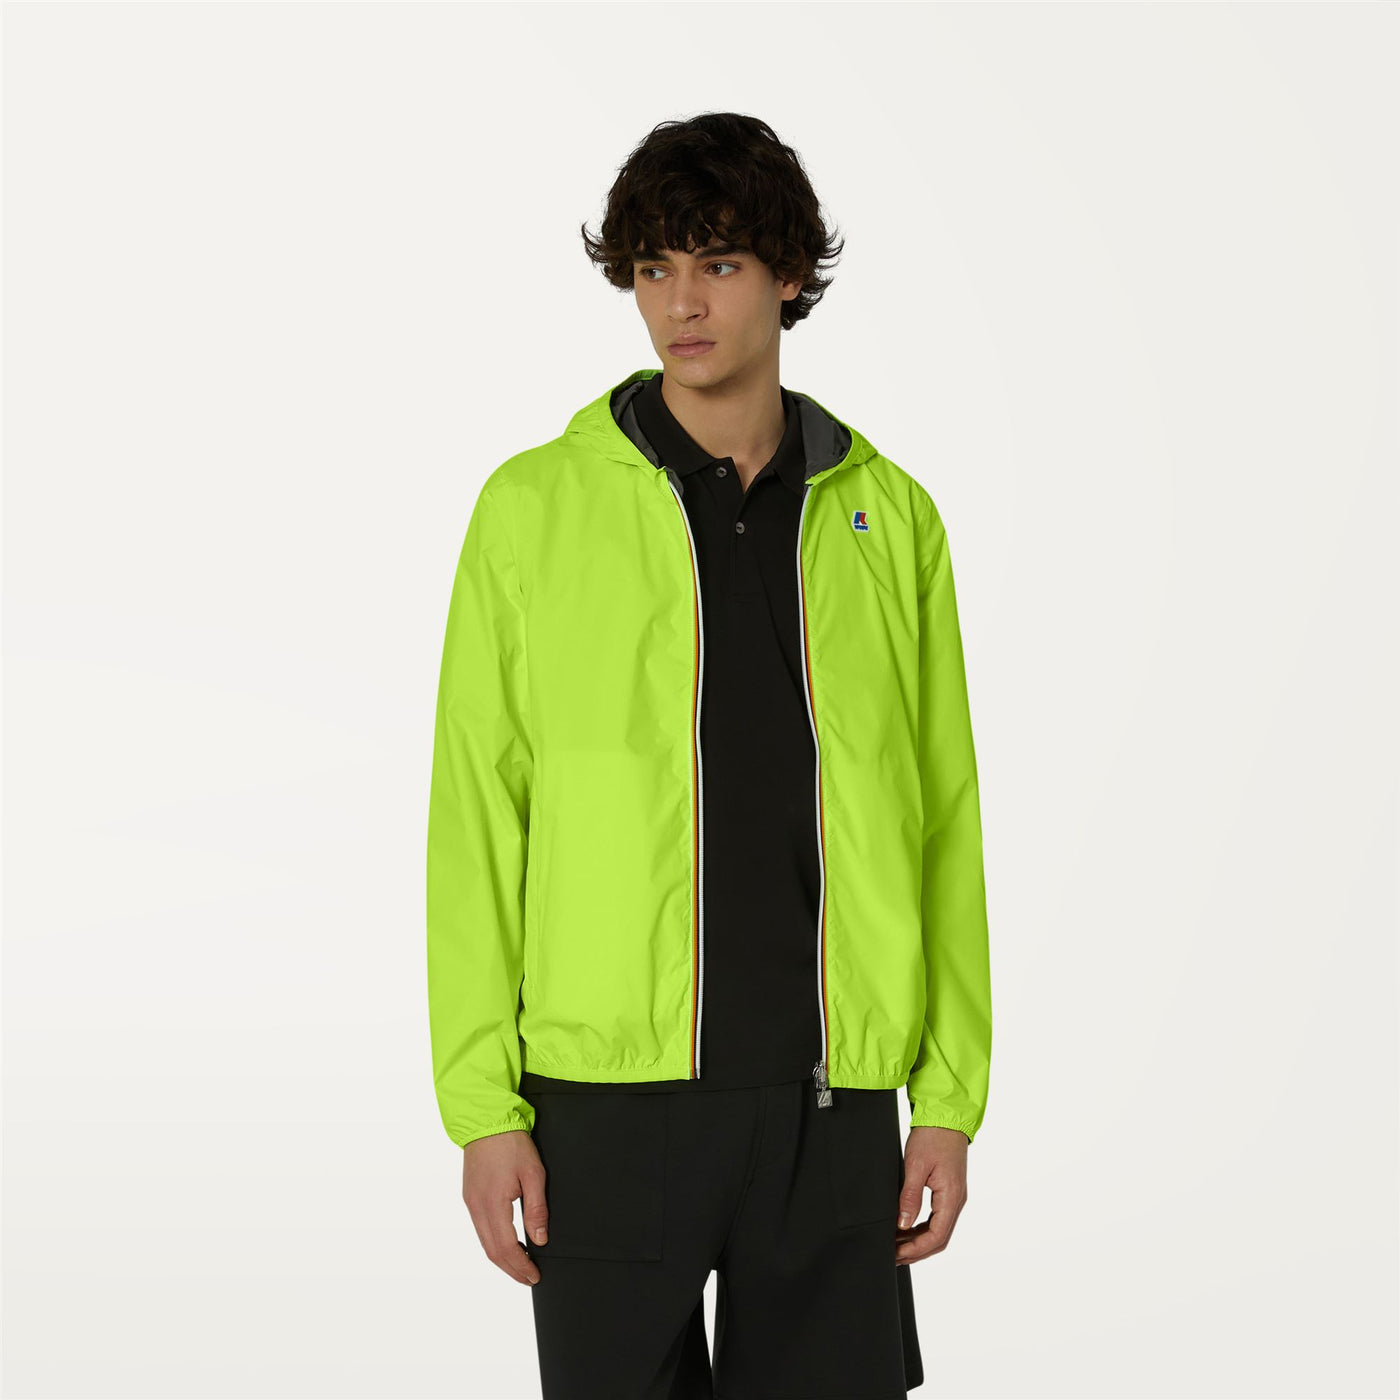 Jackets Man Jacques Plus Double Fluo Short YELLOW FLUO-GREY Dressed Back (jpg Rgb)		